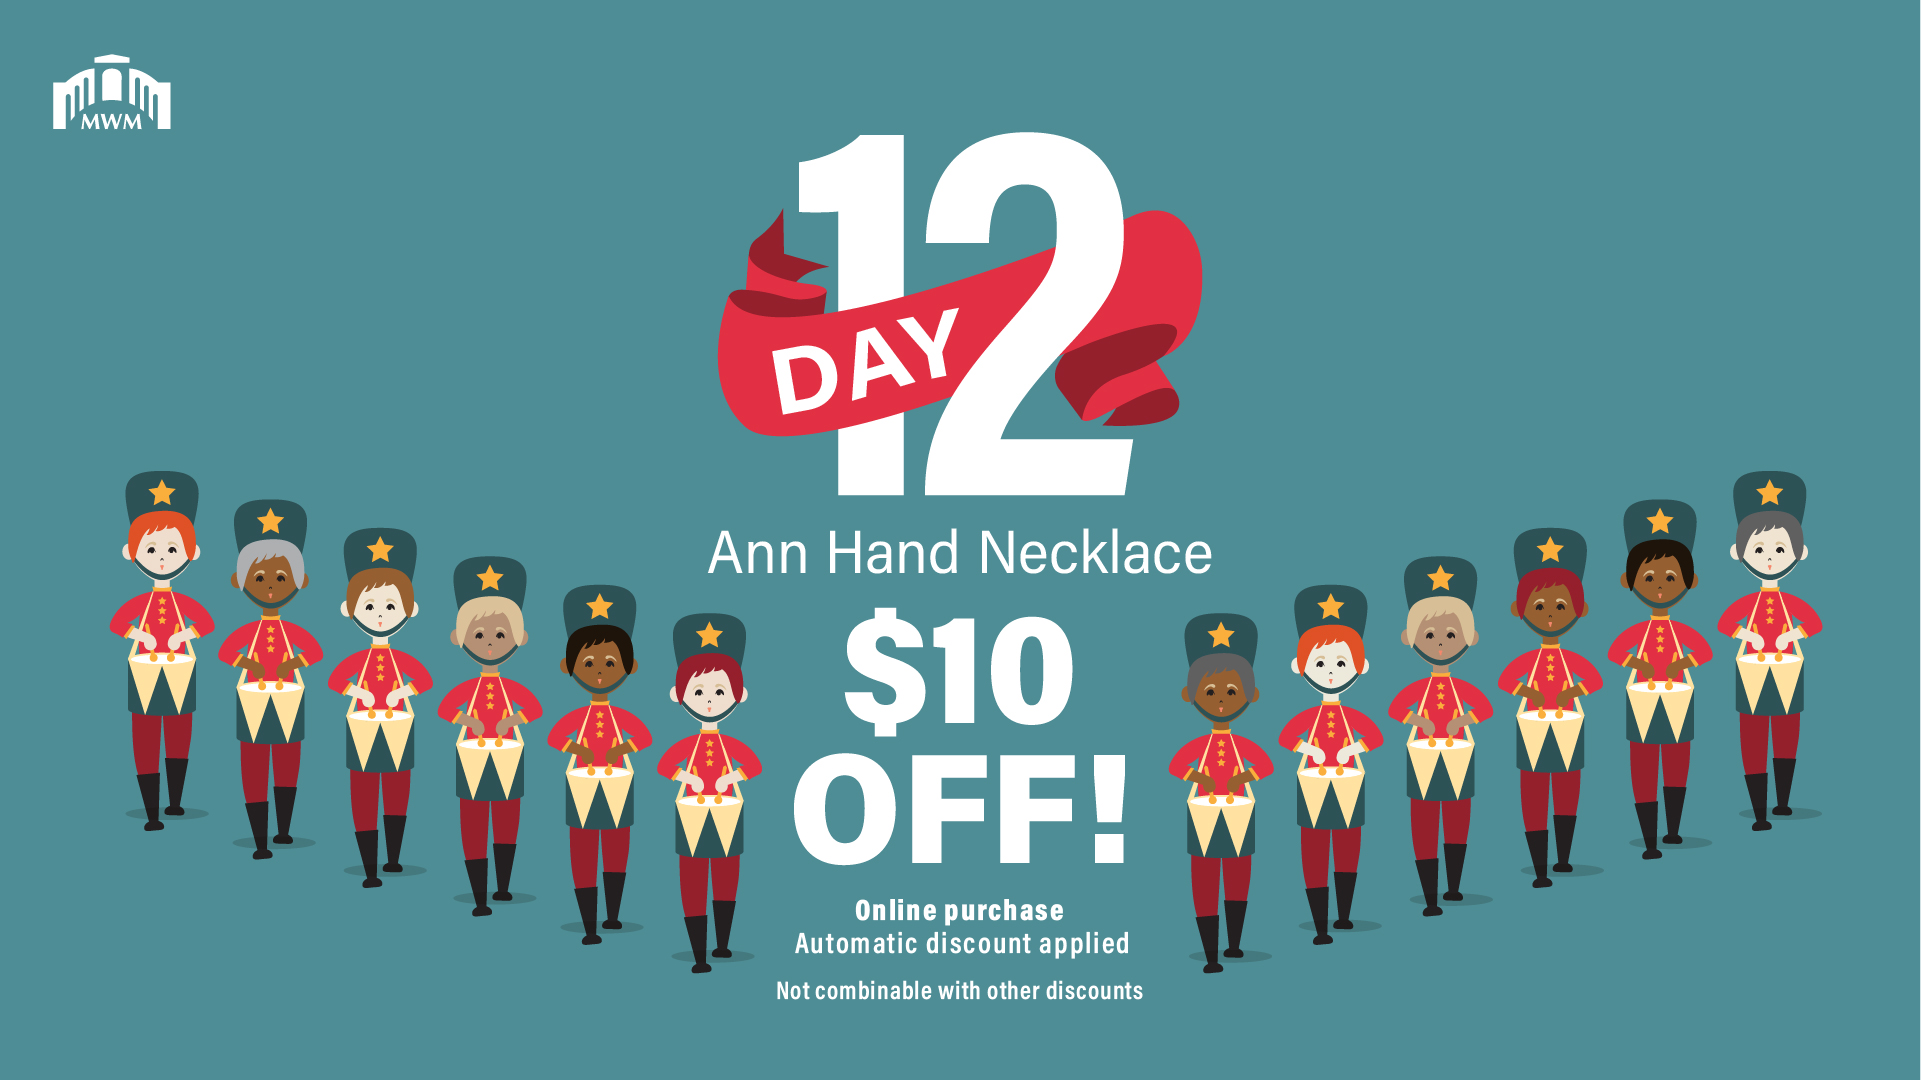 The Twelve Days of Christmas. Day 12 with twelve drummers drumming. The words save $10 off Ann Hand Necklace.